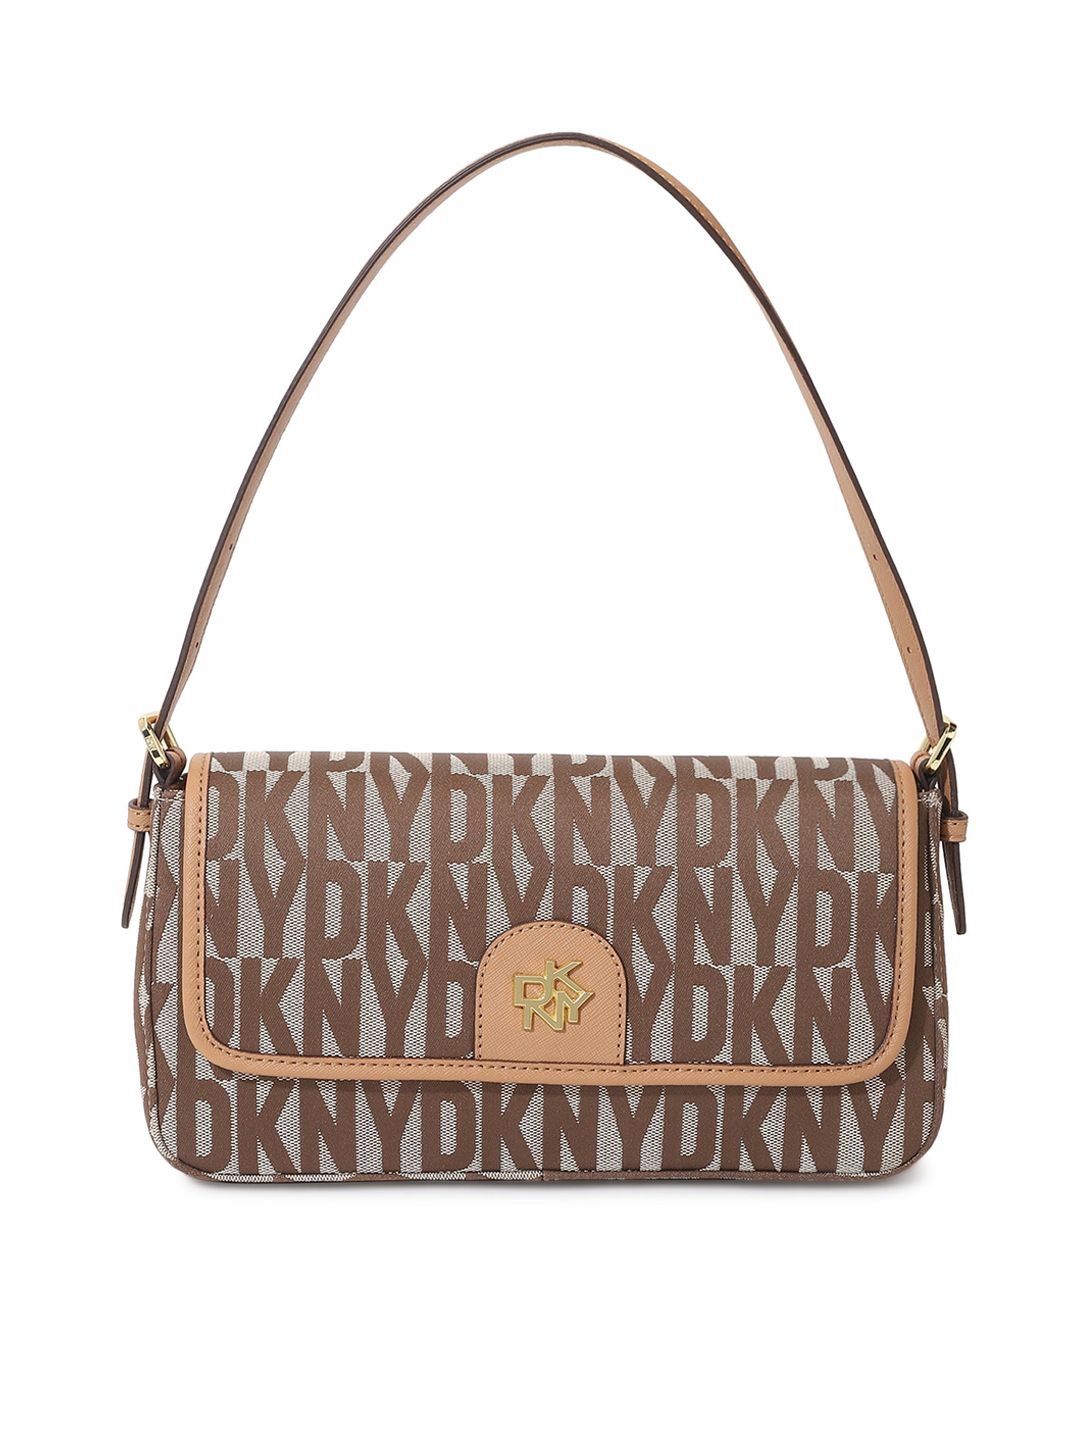 DKNY Printed Leather Structured Shoulder Bag (Onesize) by Myntra